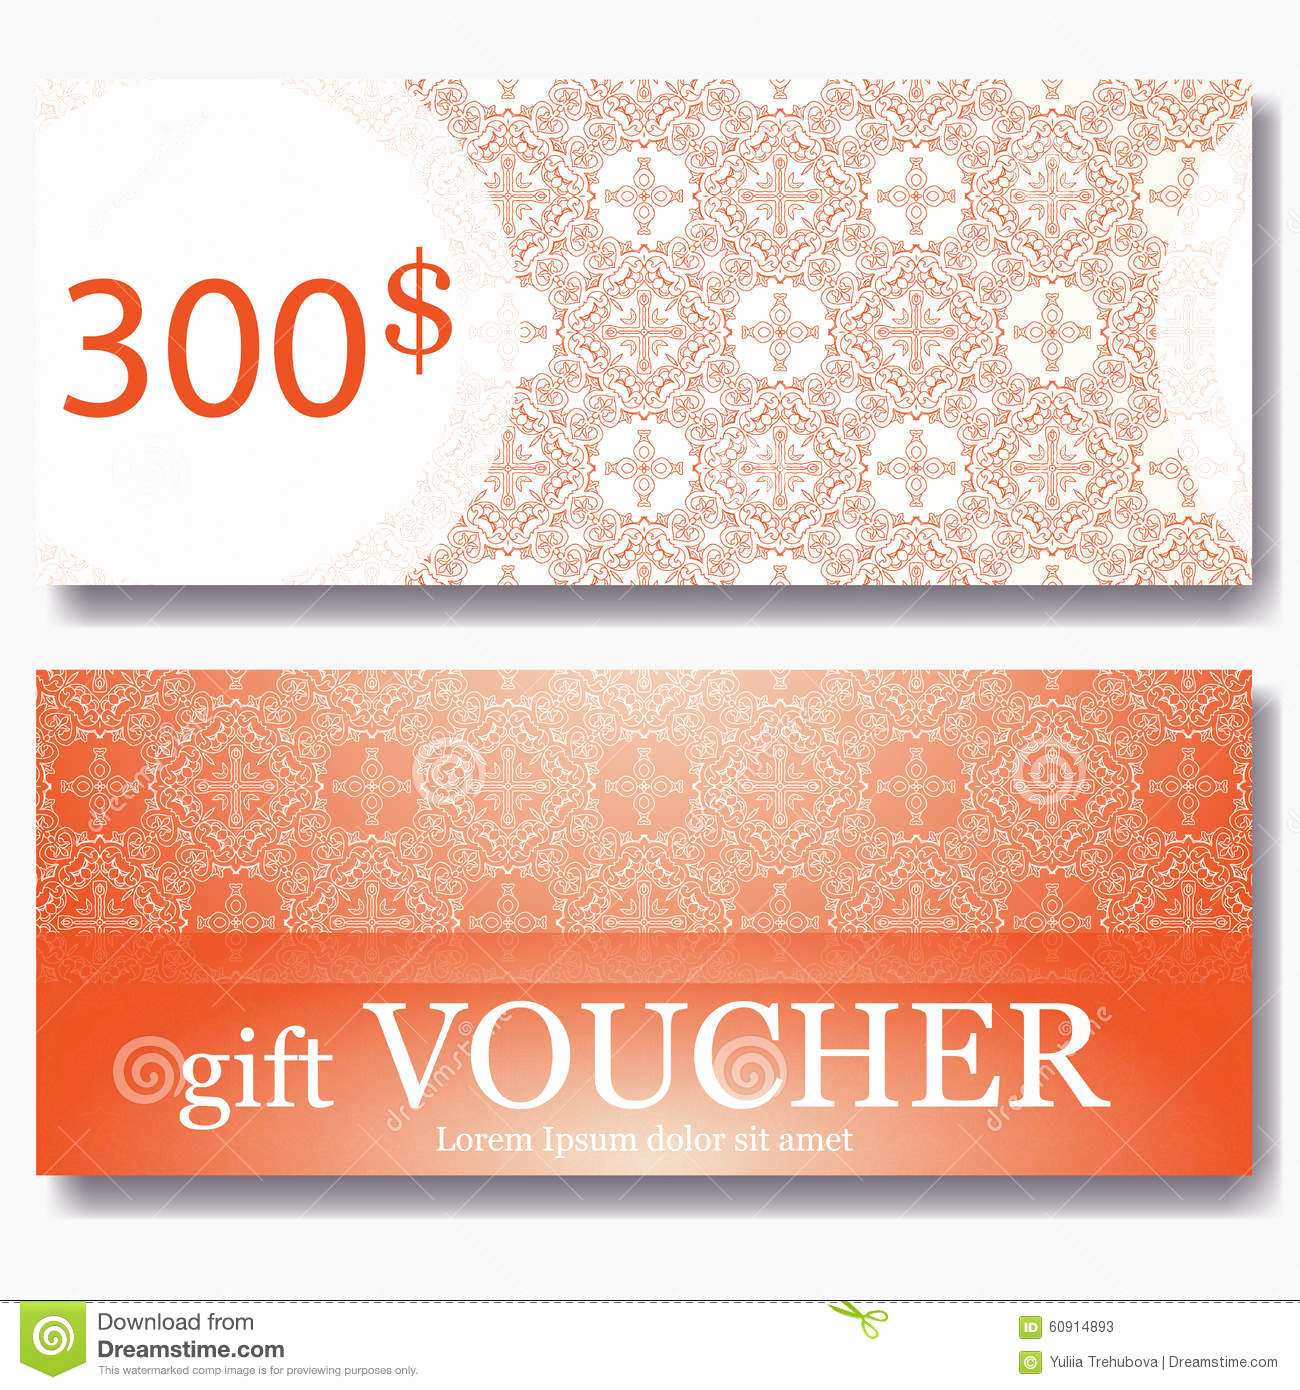 Magazine Subscription Gift Certificate Template Inspirational Gift Voucher Template with Mandala Design Certificate for